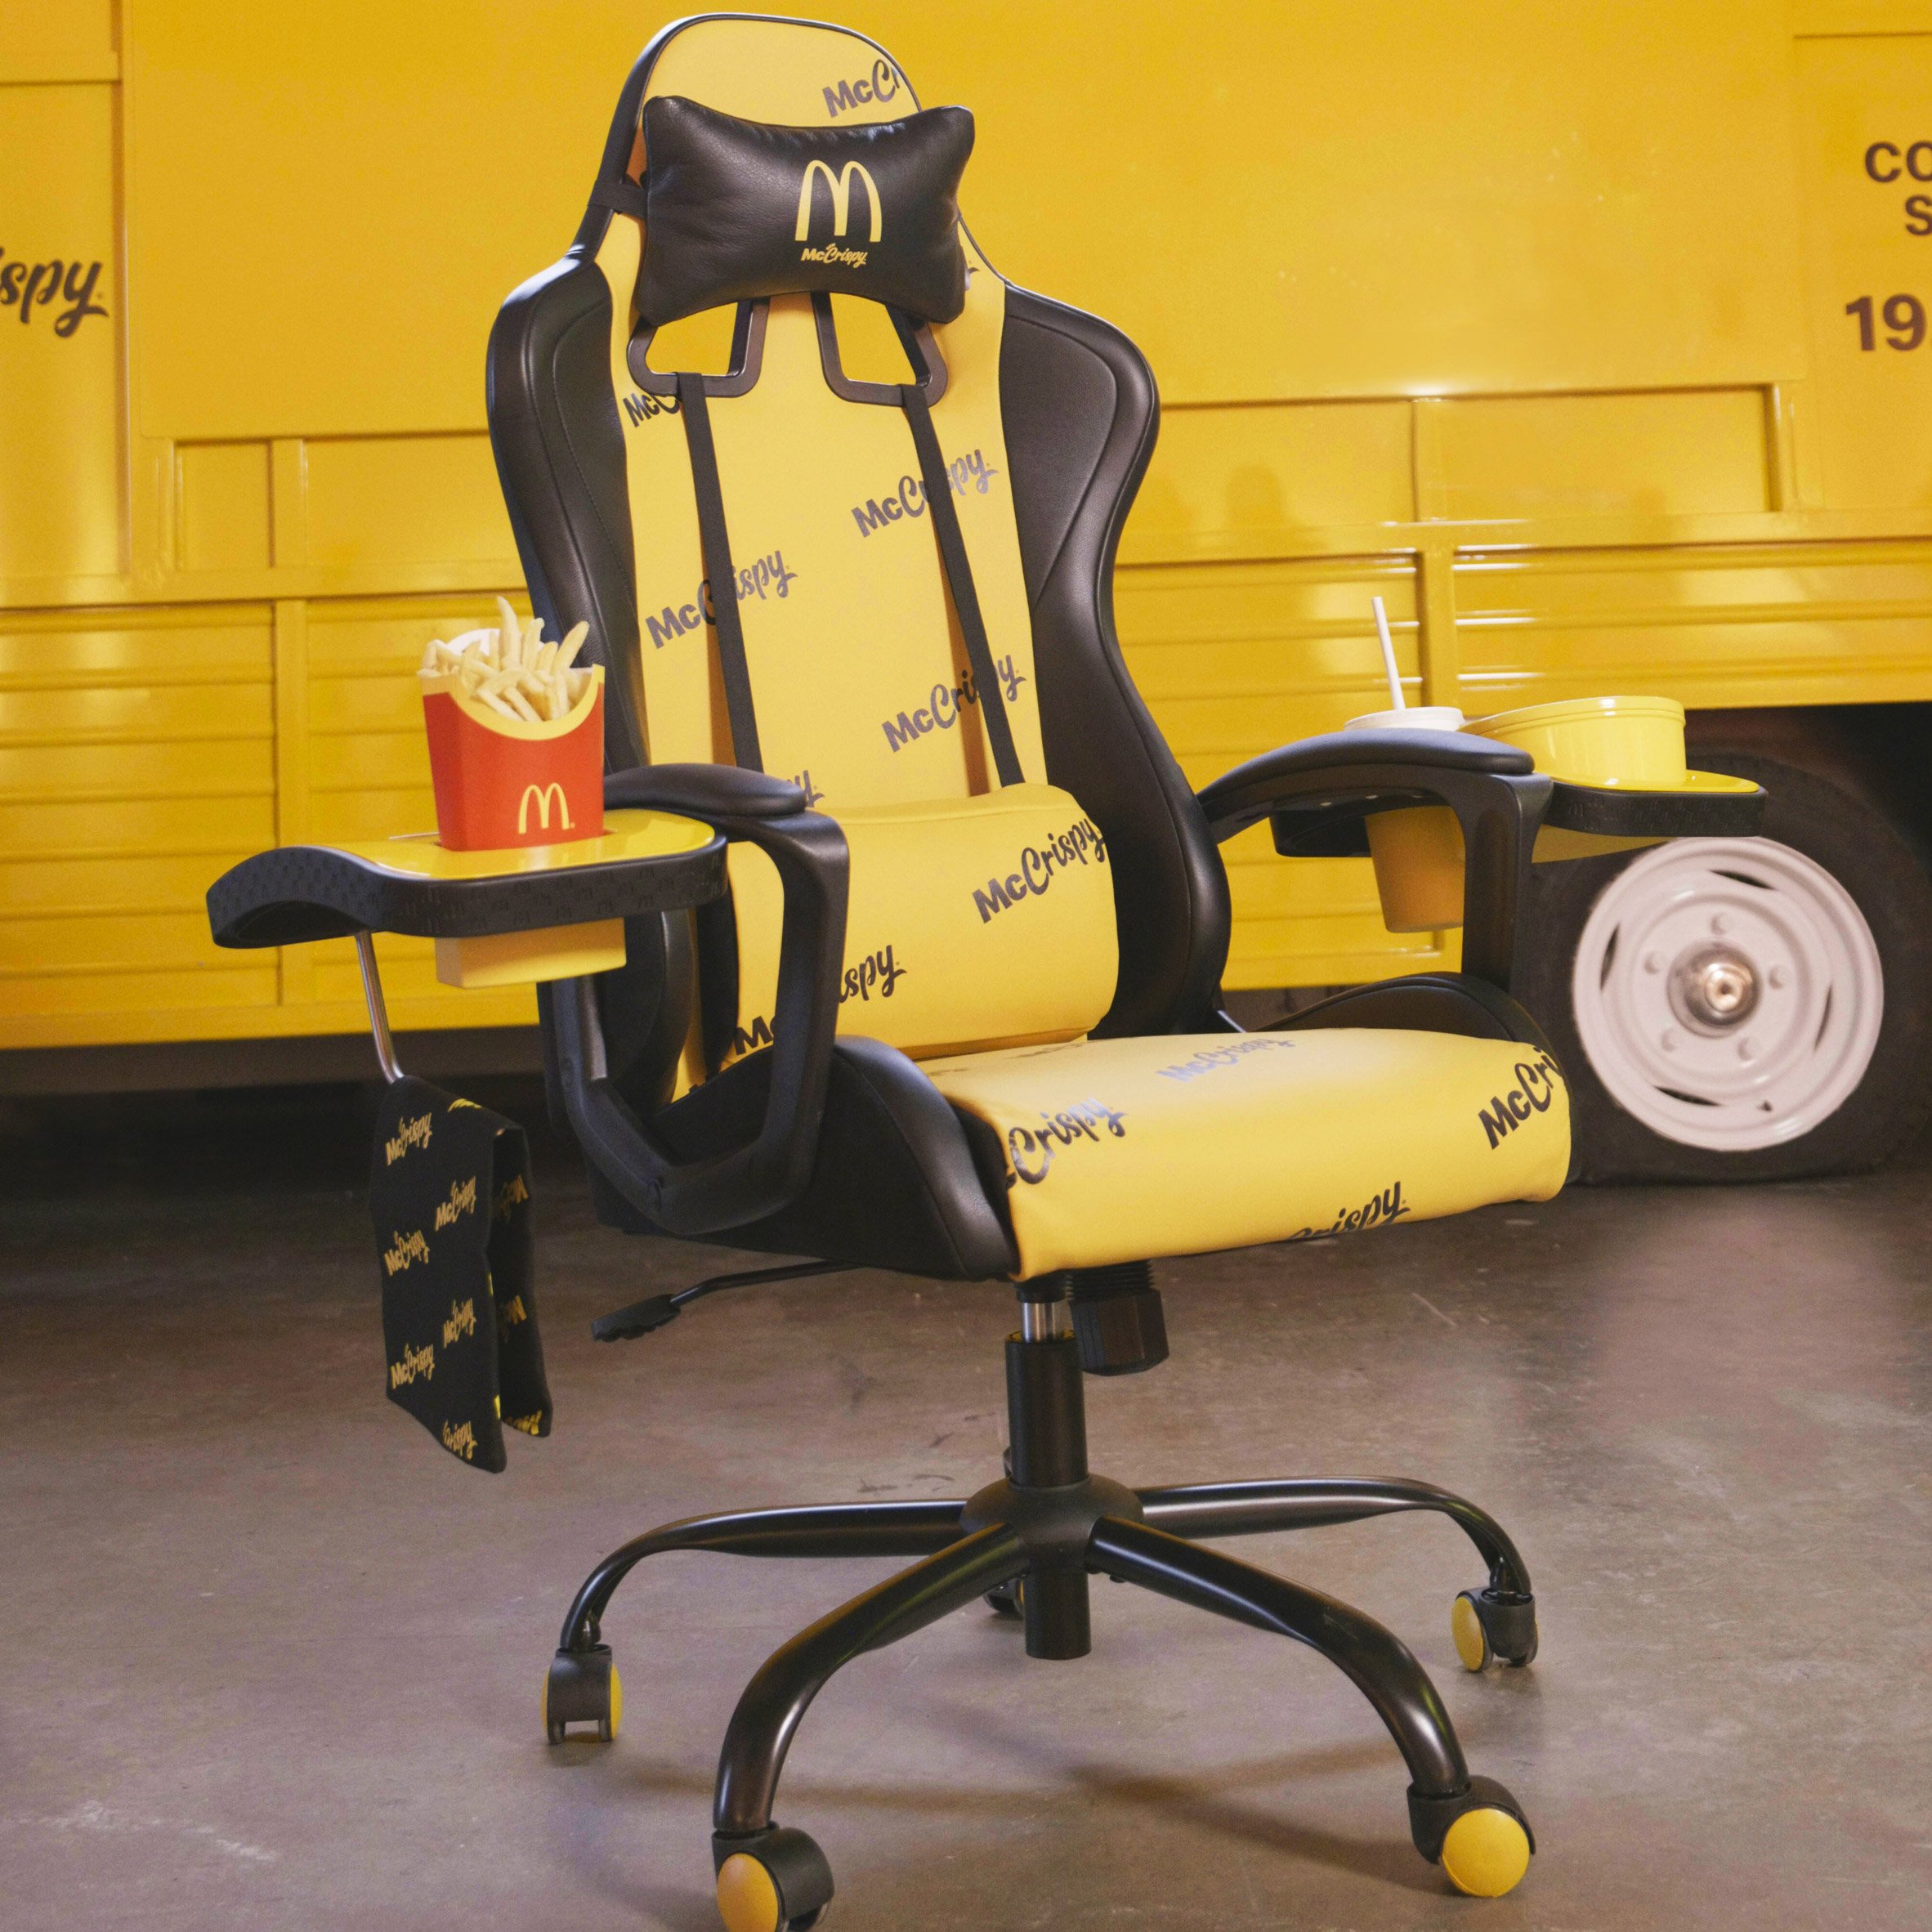 McDonald's designs ultimate gaming chair for snacking and playing